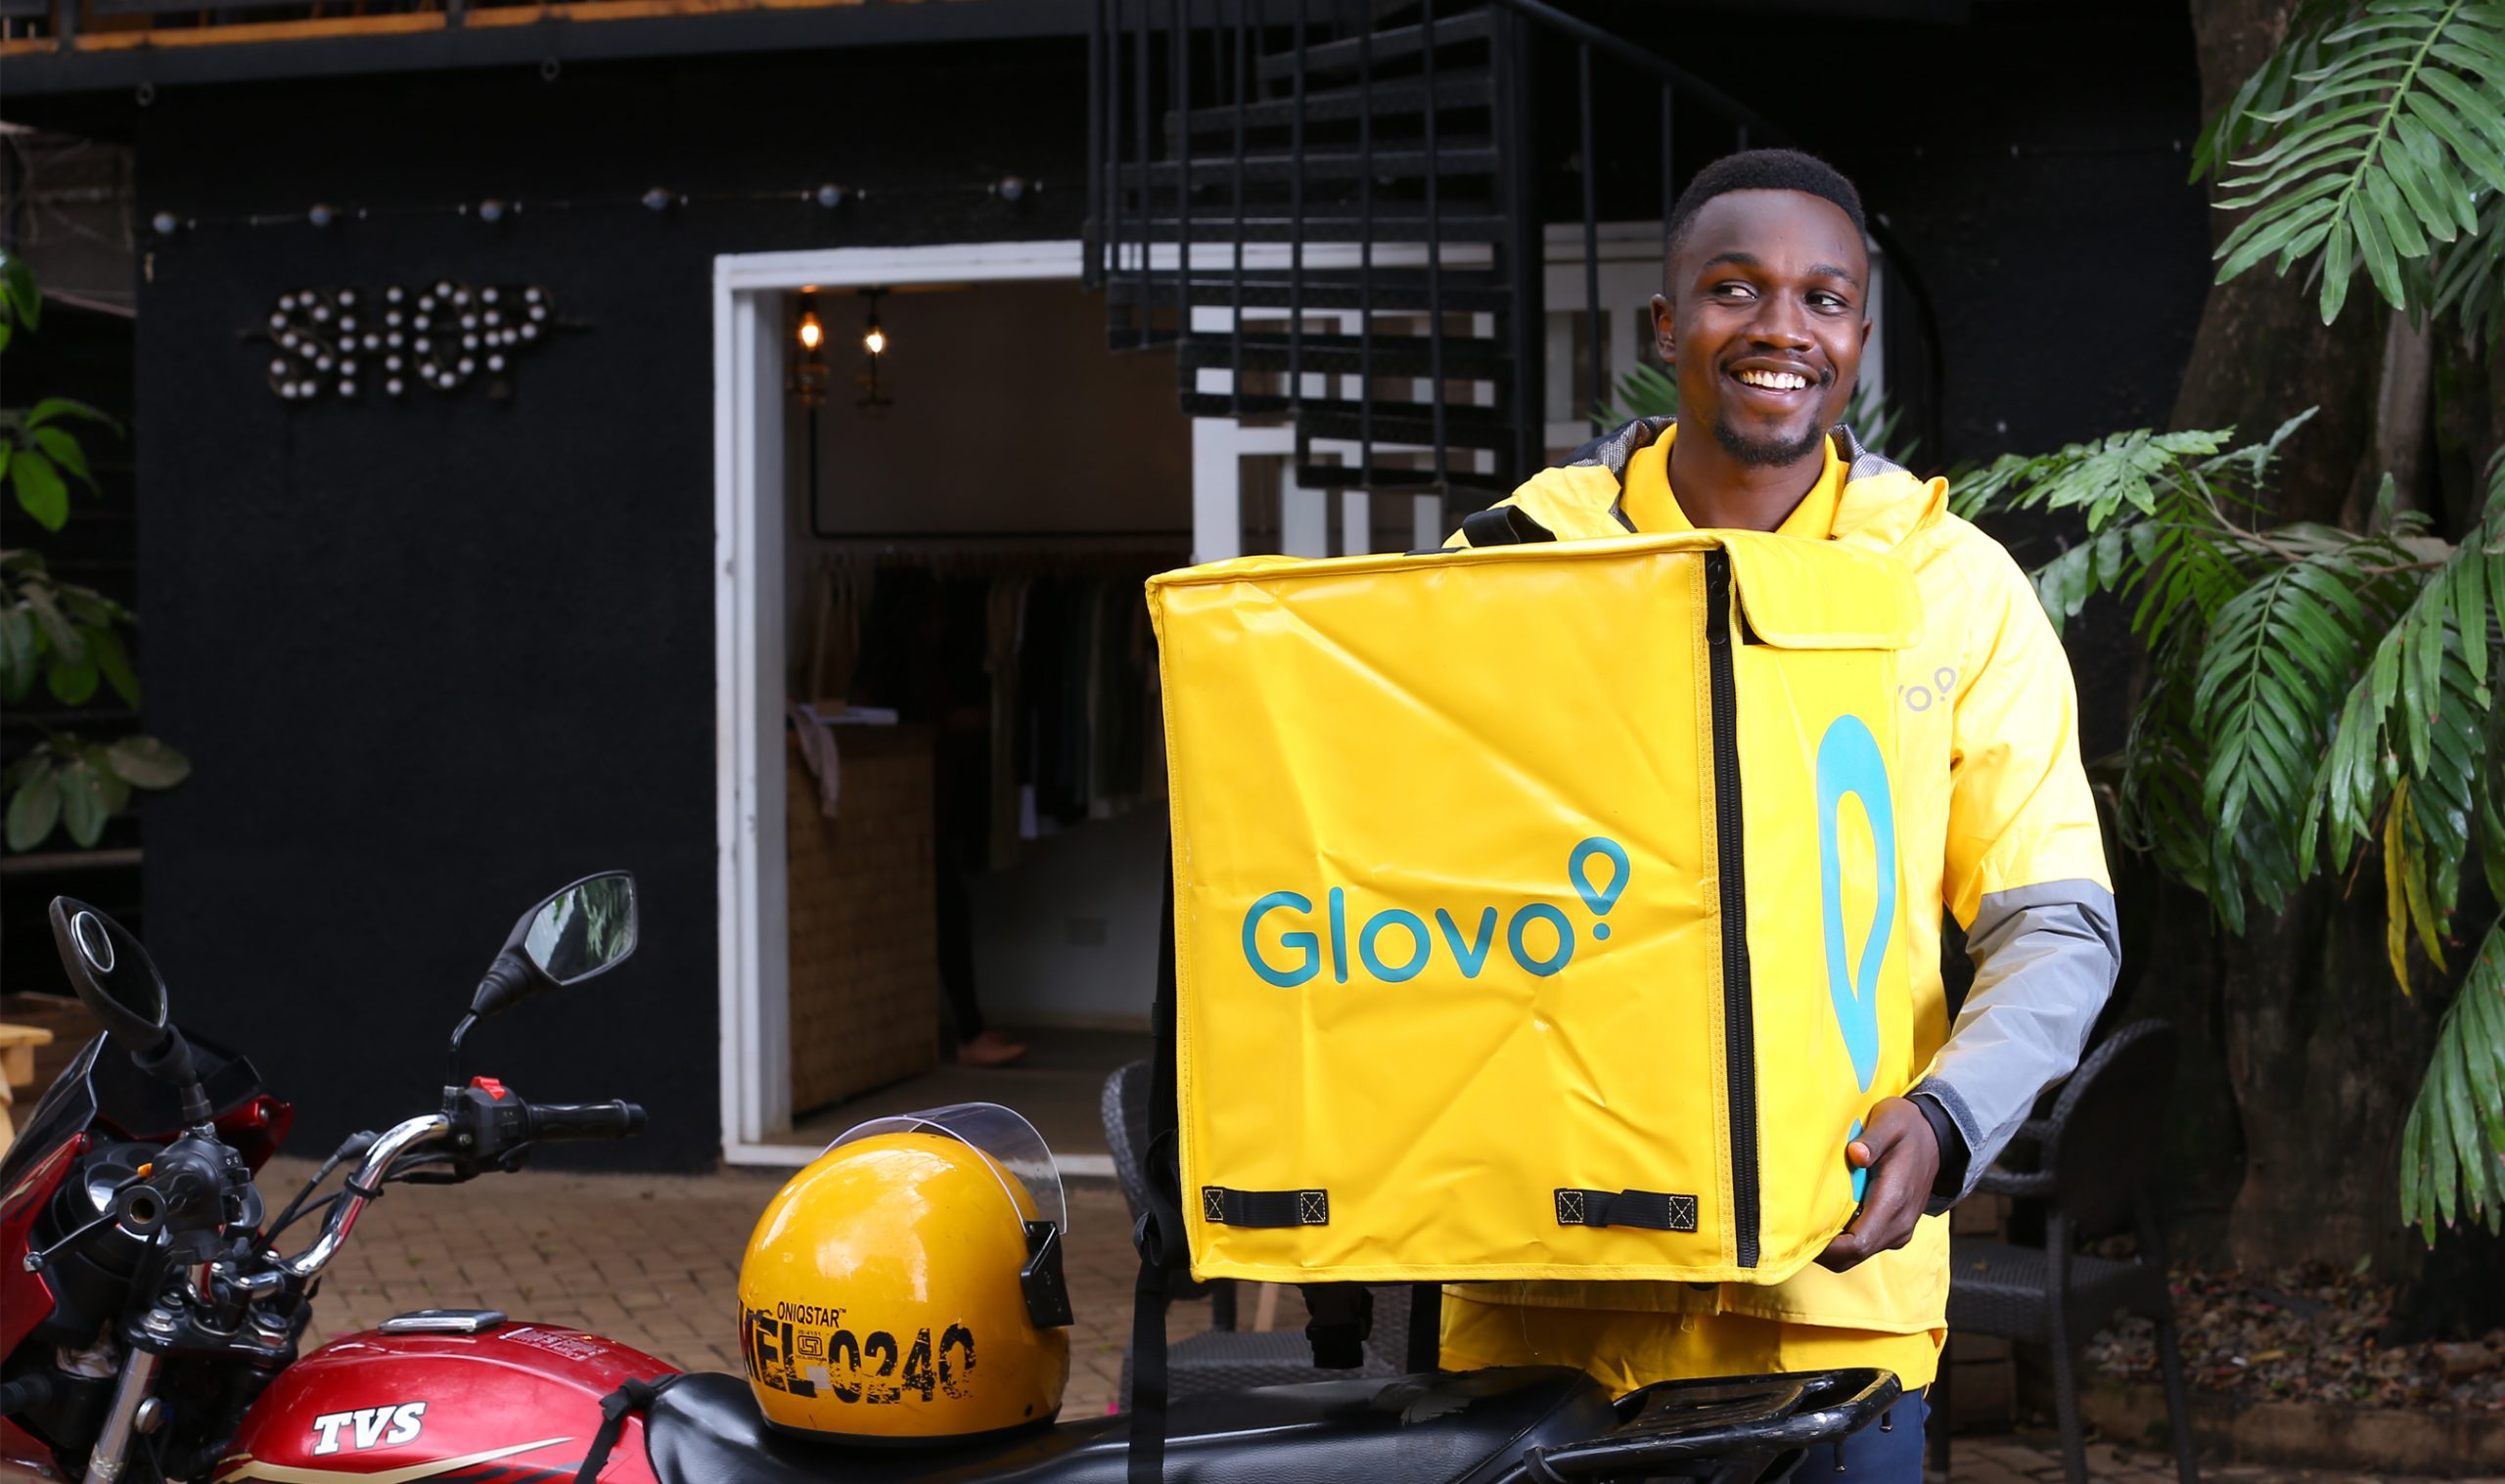 Glovo has launched Glovo Local